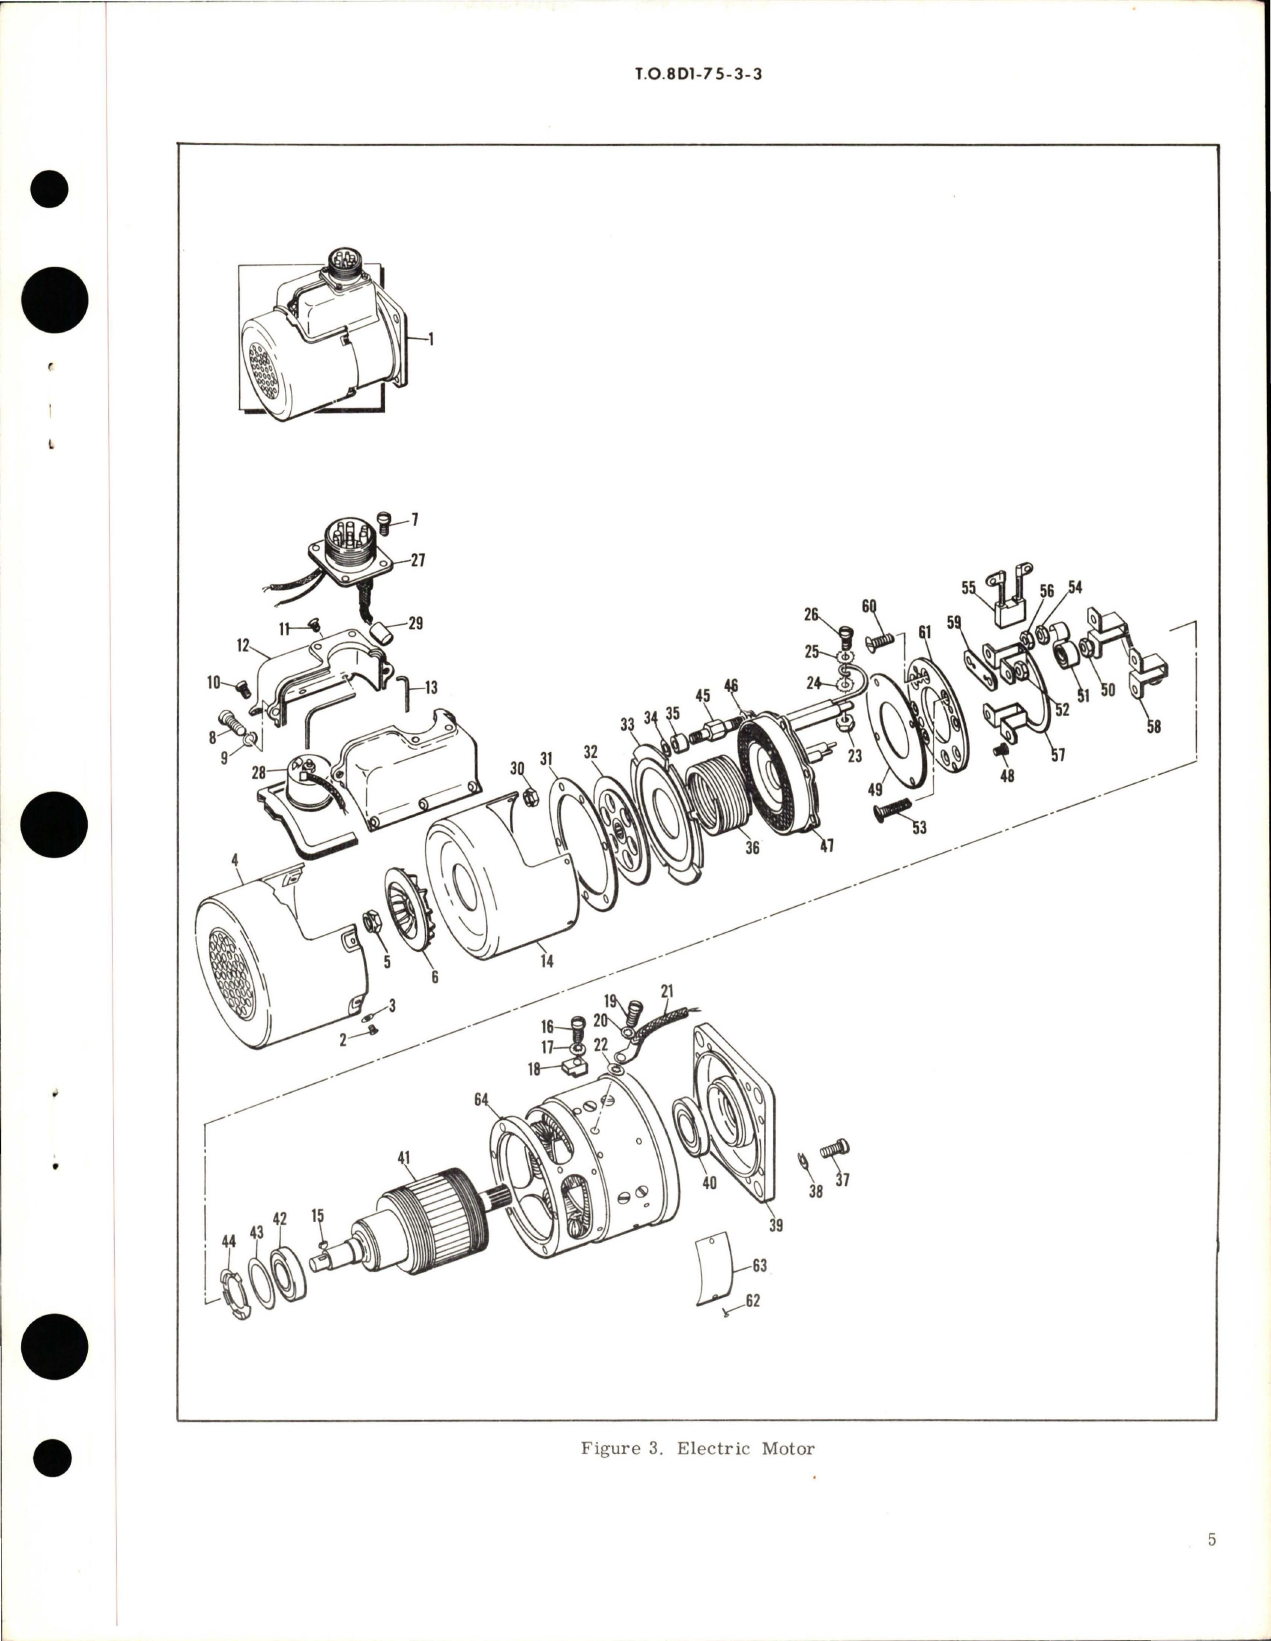 Sample page 5 from AirCorps Library document: Overhaul with Parts Breakdown for DC Electric Motor - Part 49EC1A